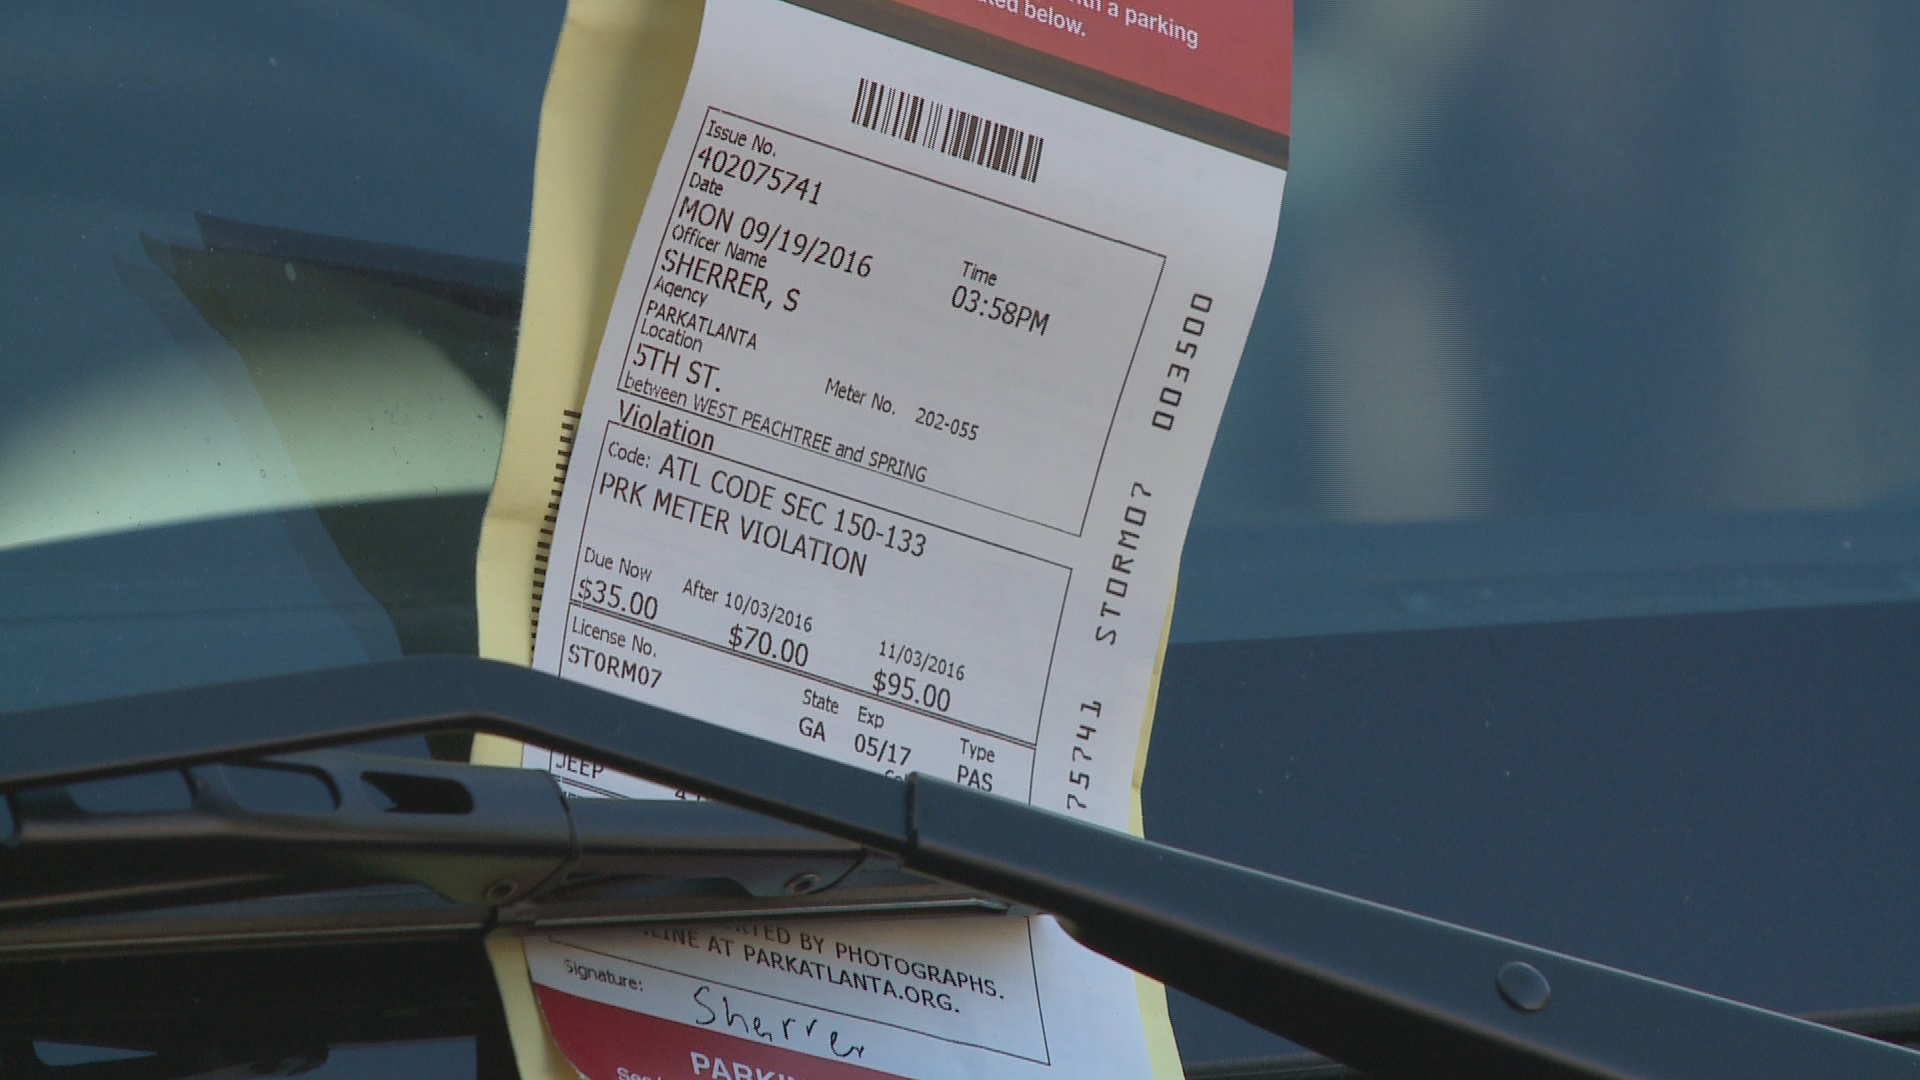 11alive.com | Did you get your parking ticket in one of the city's enforcement hot spots?1920 x 1080